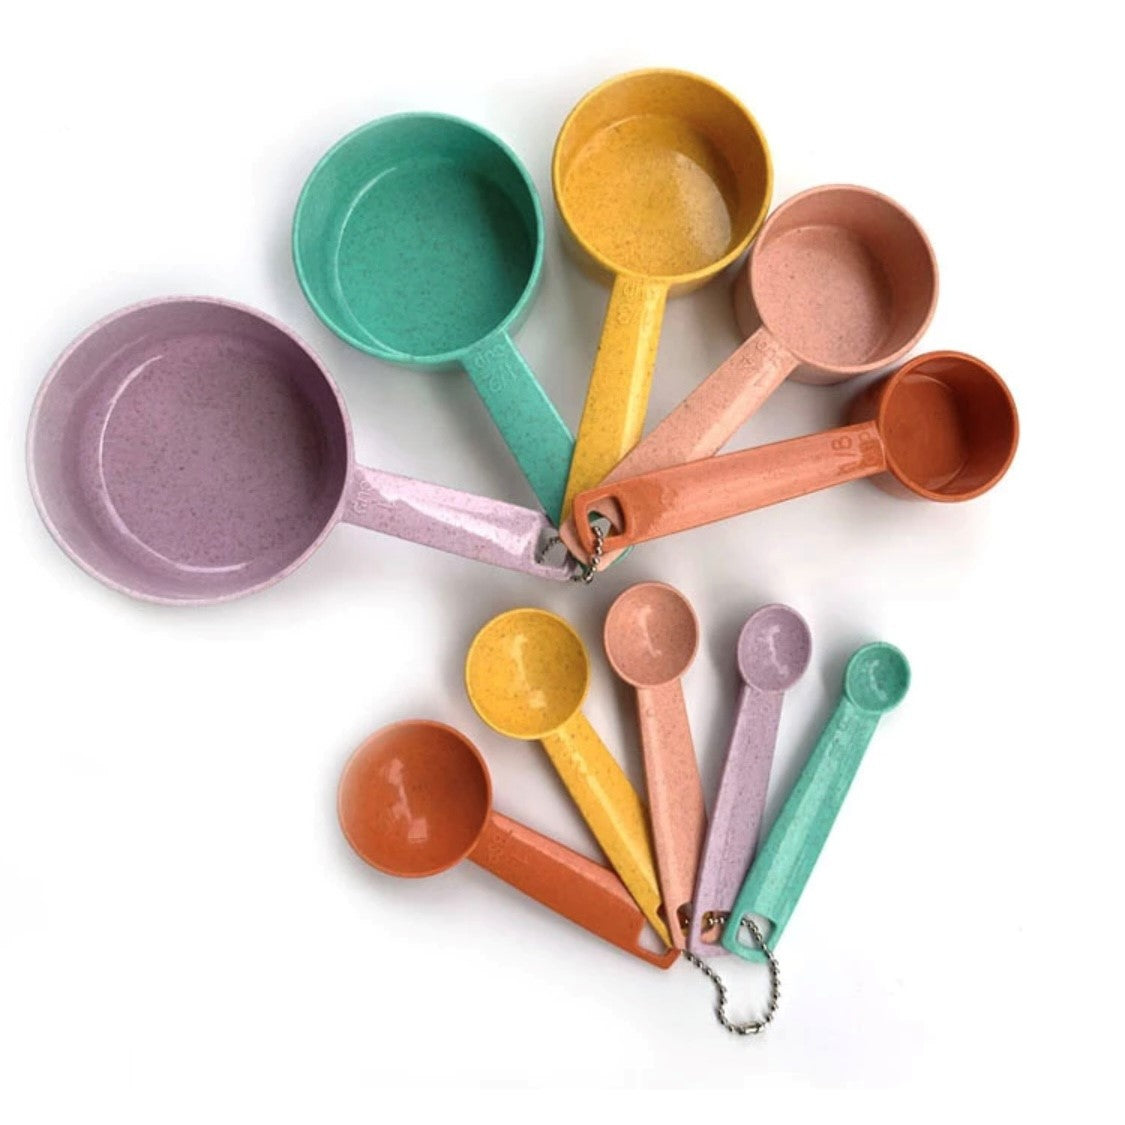 Measuring Cups & Spoons (set) - made from wheat straw